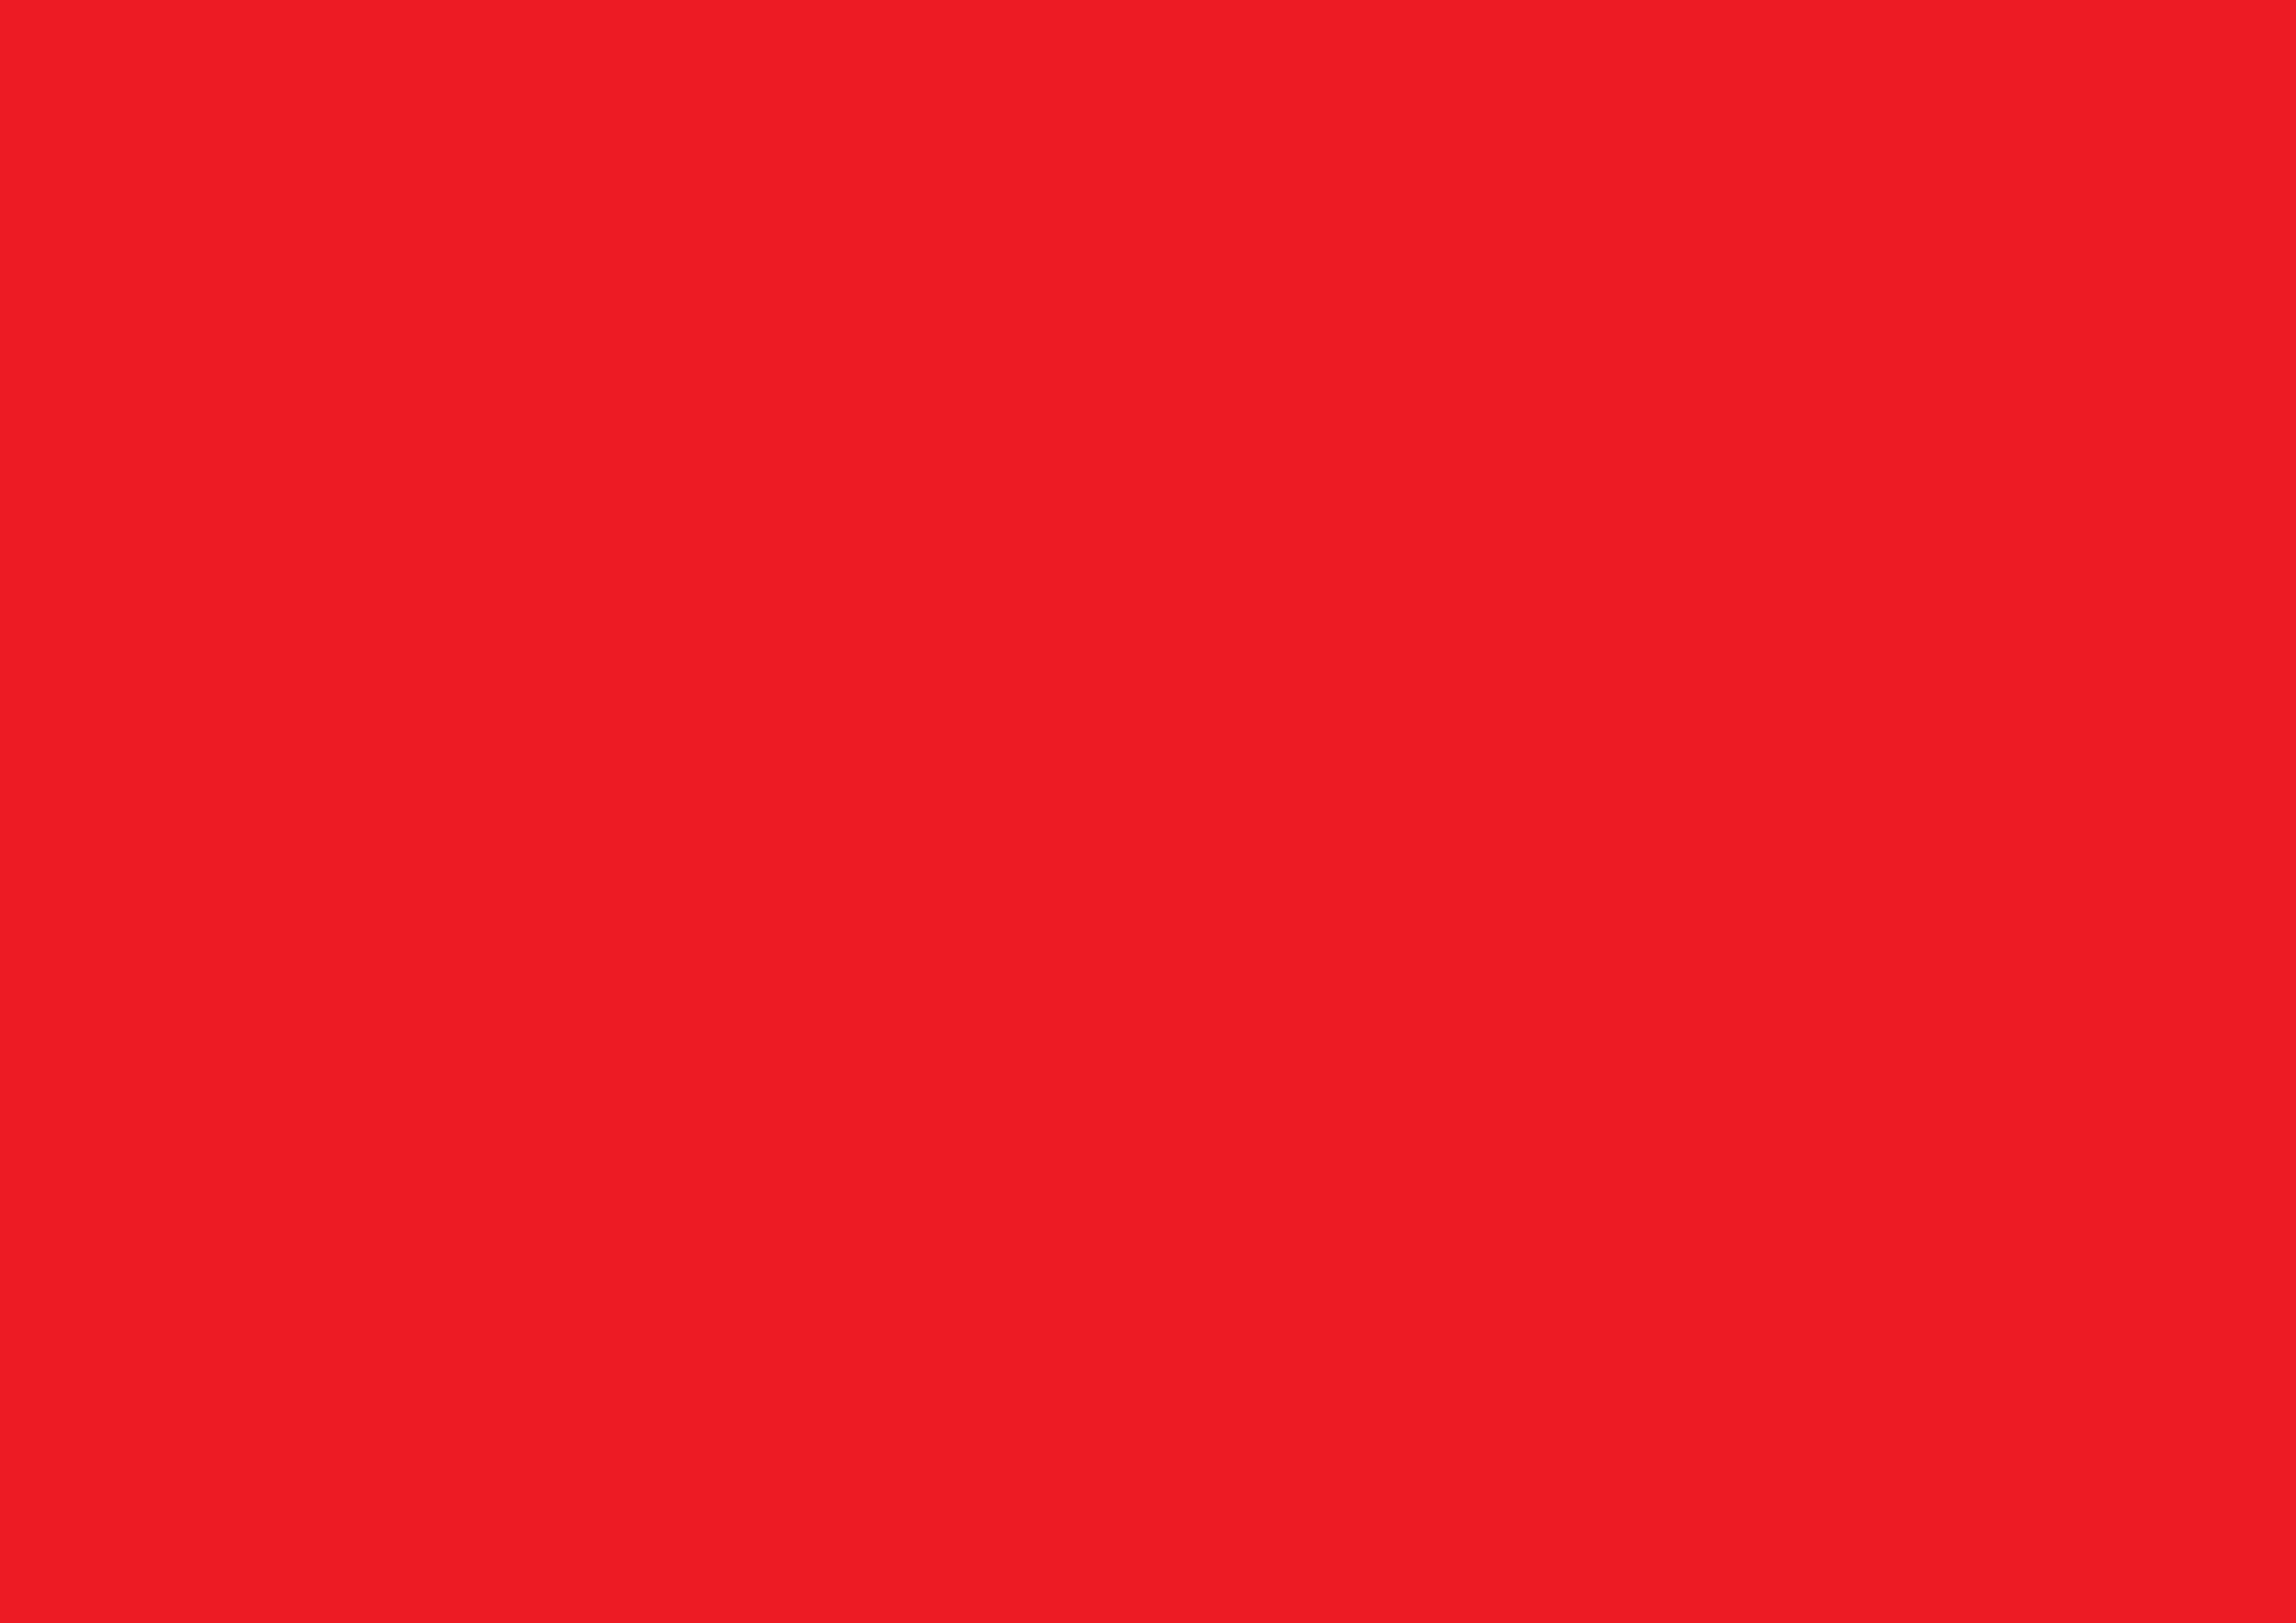 3508x2480 Red Pigment Solid Color Background